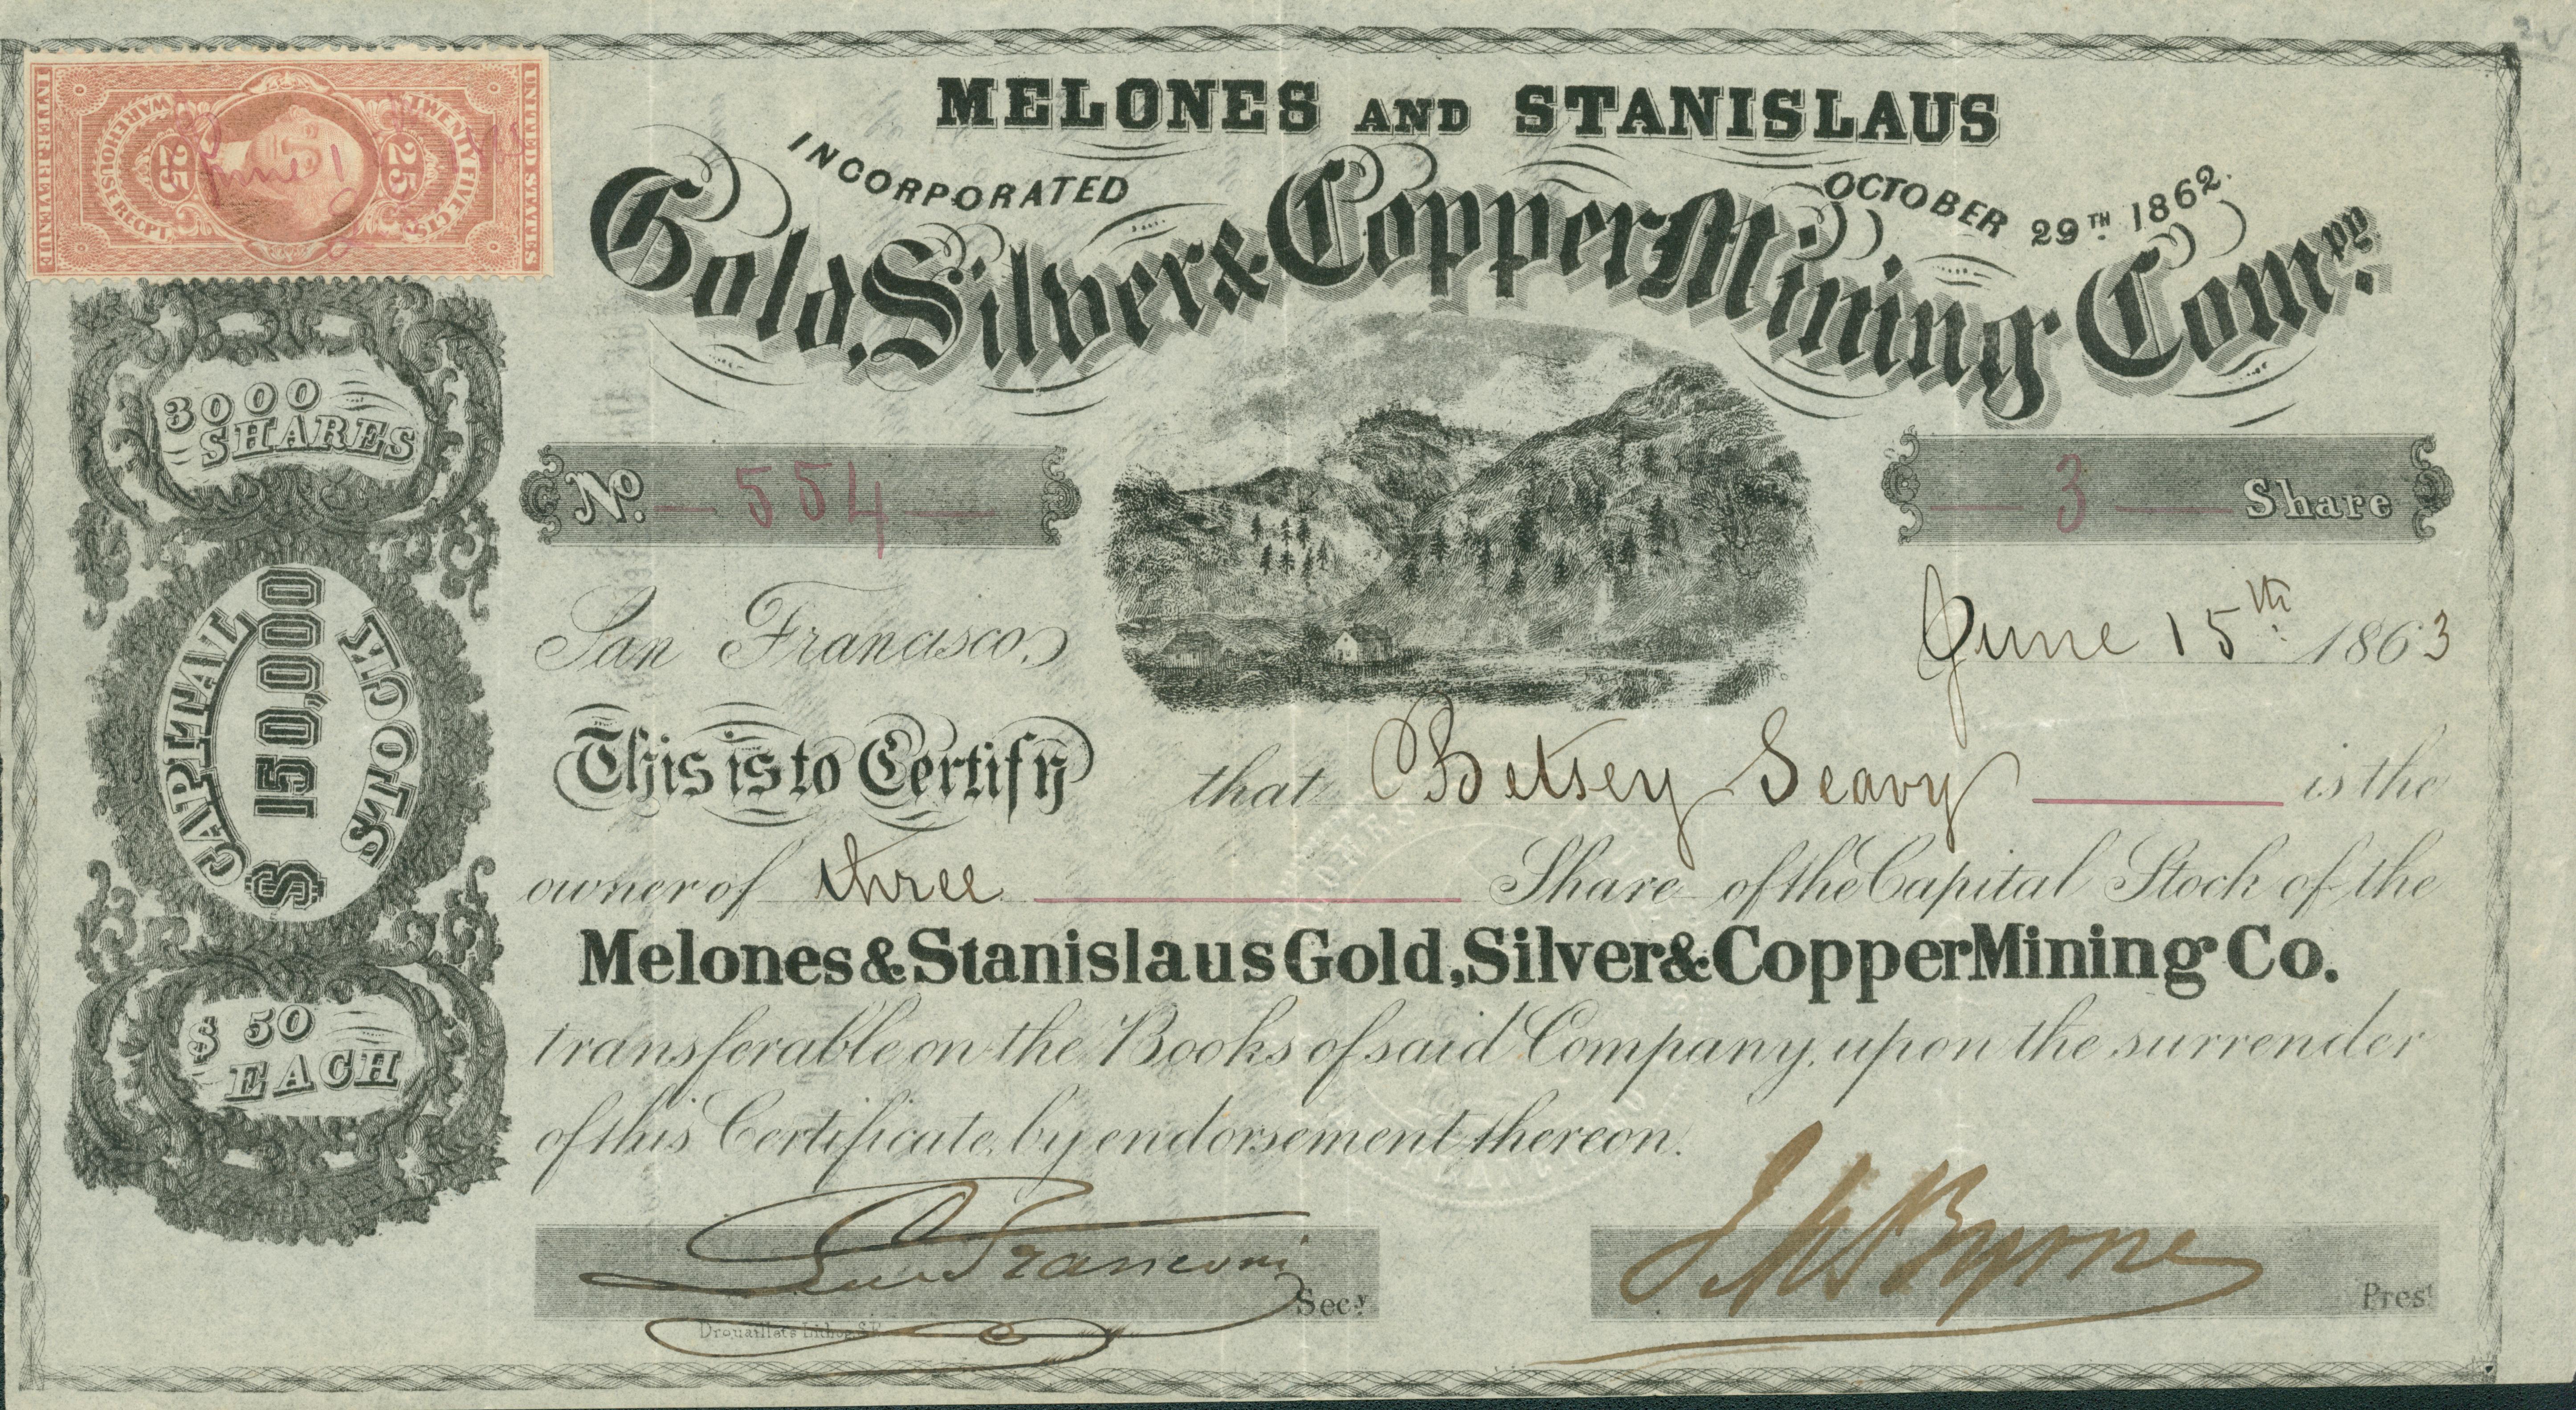 Certificate, No. 554 for 3 Shares, signed by Betsey Seavy.